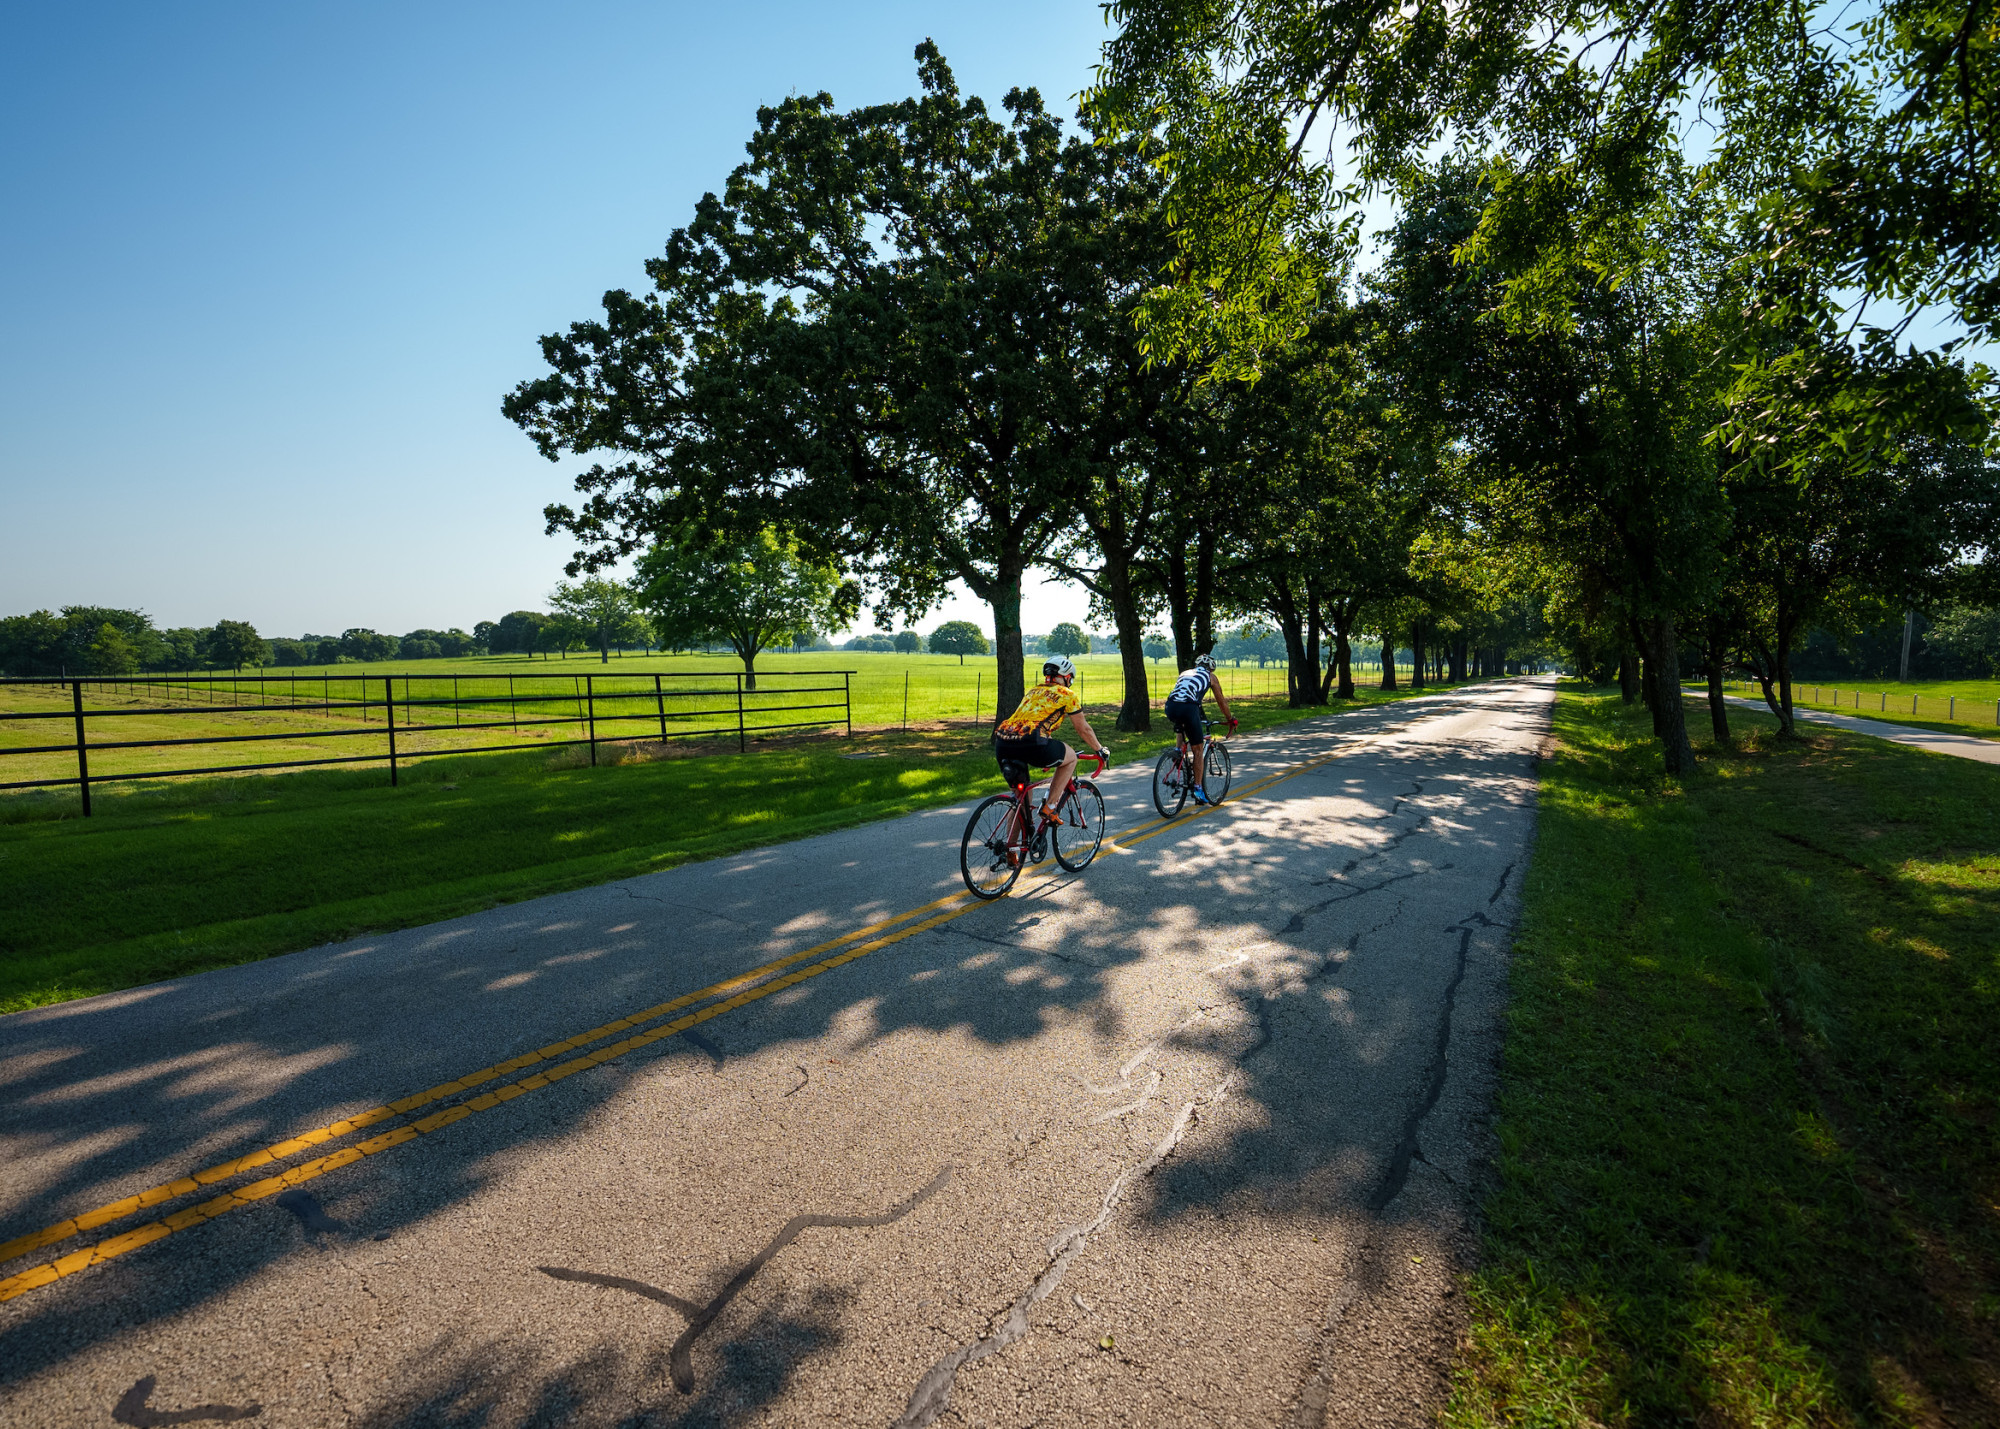 cyclists riding bikes on a country road